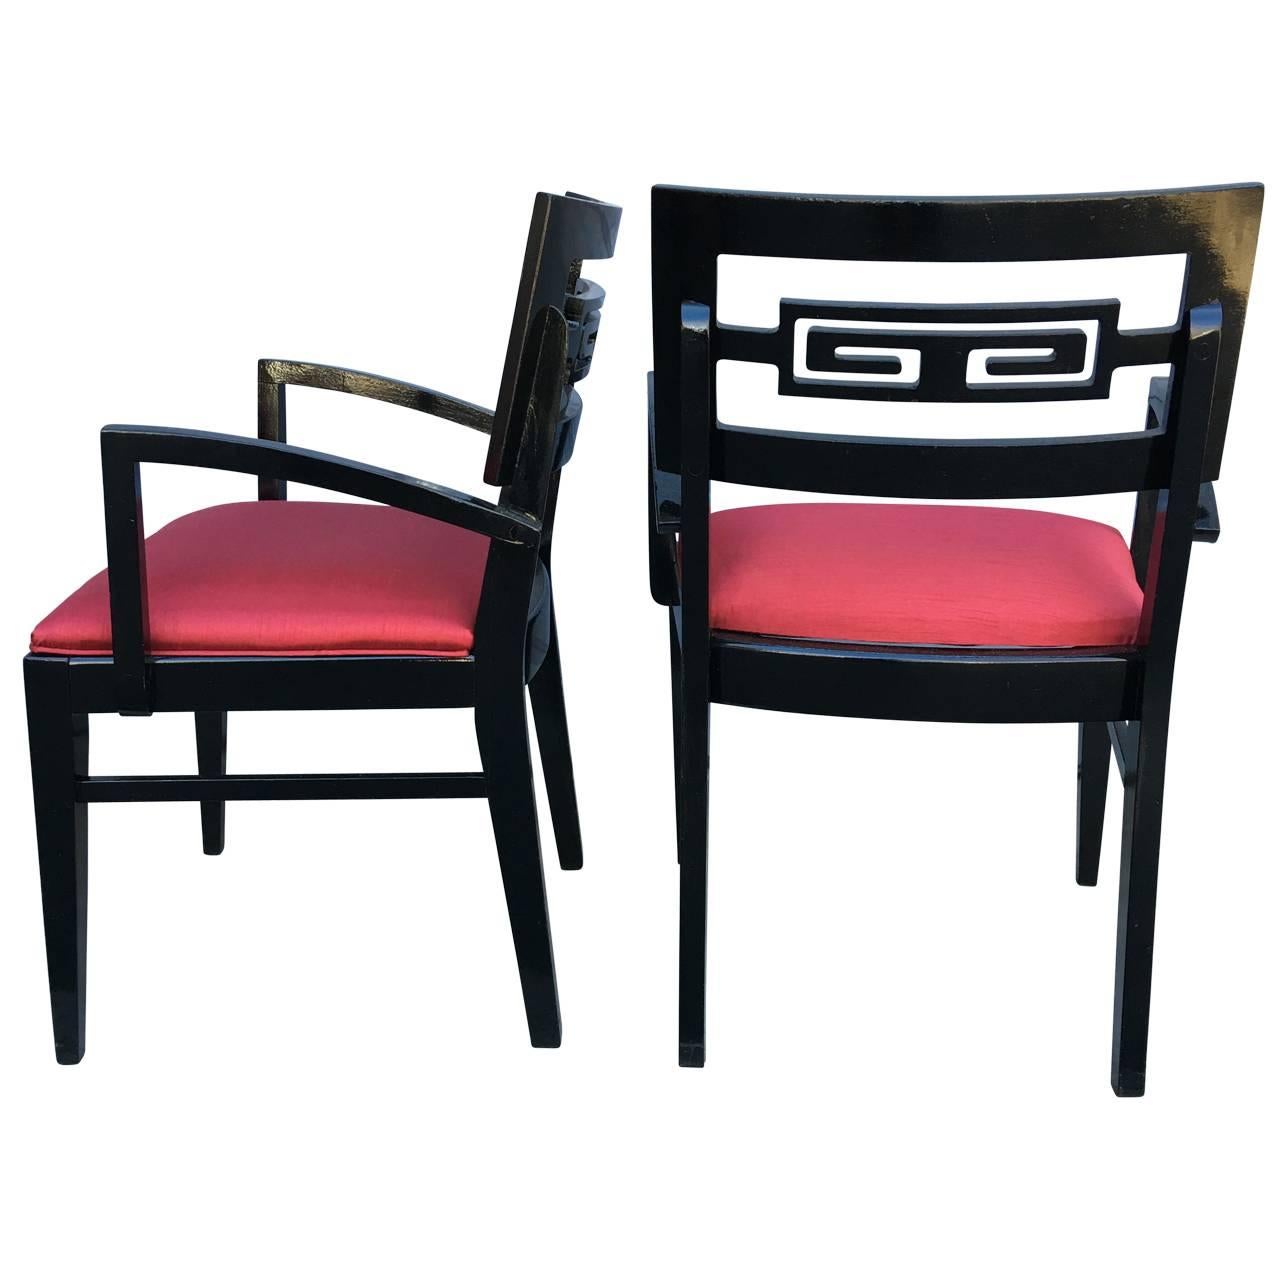 Late 20th Century Set Of 4 Black Painted James Mont Style Dining Room Chairs